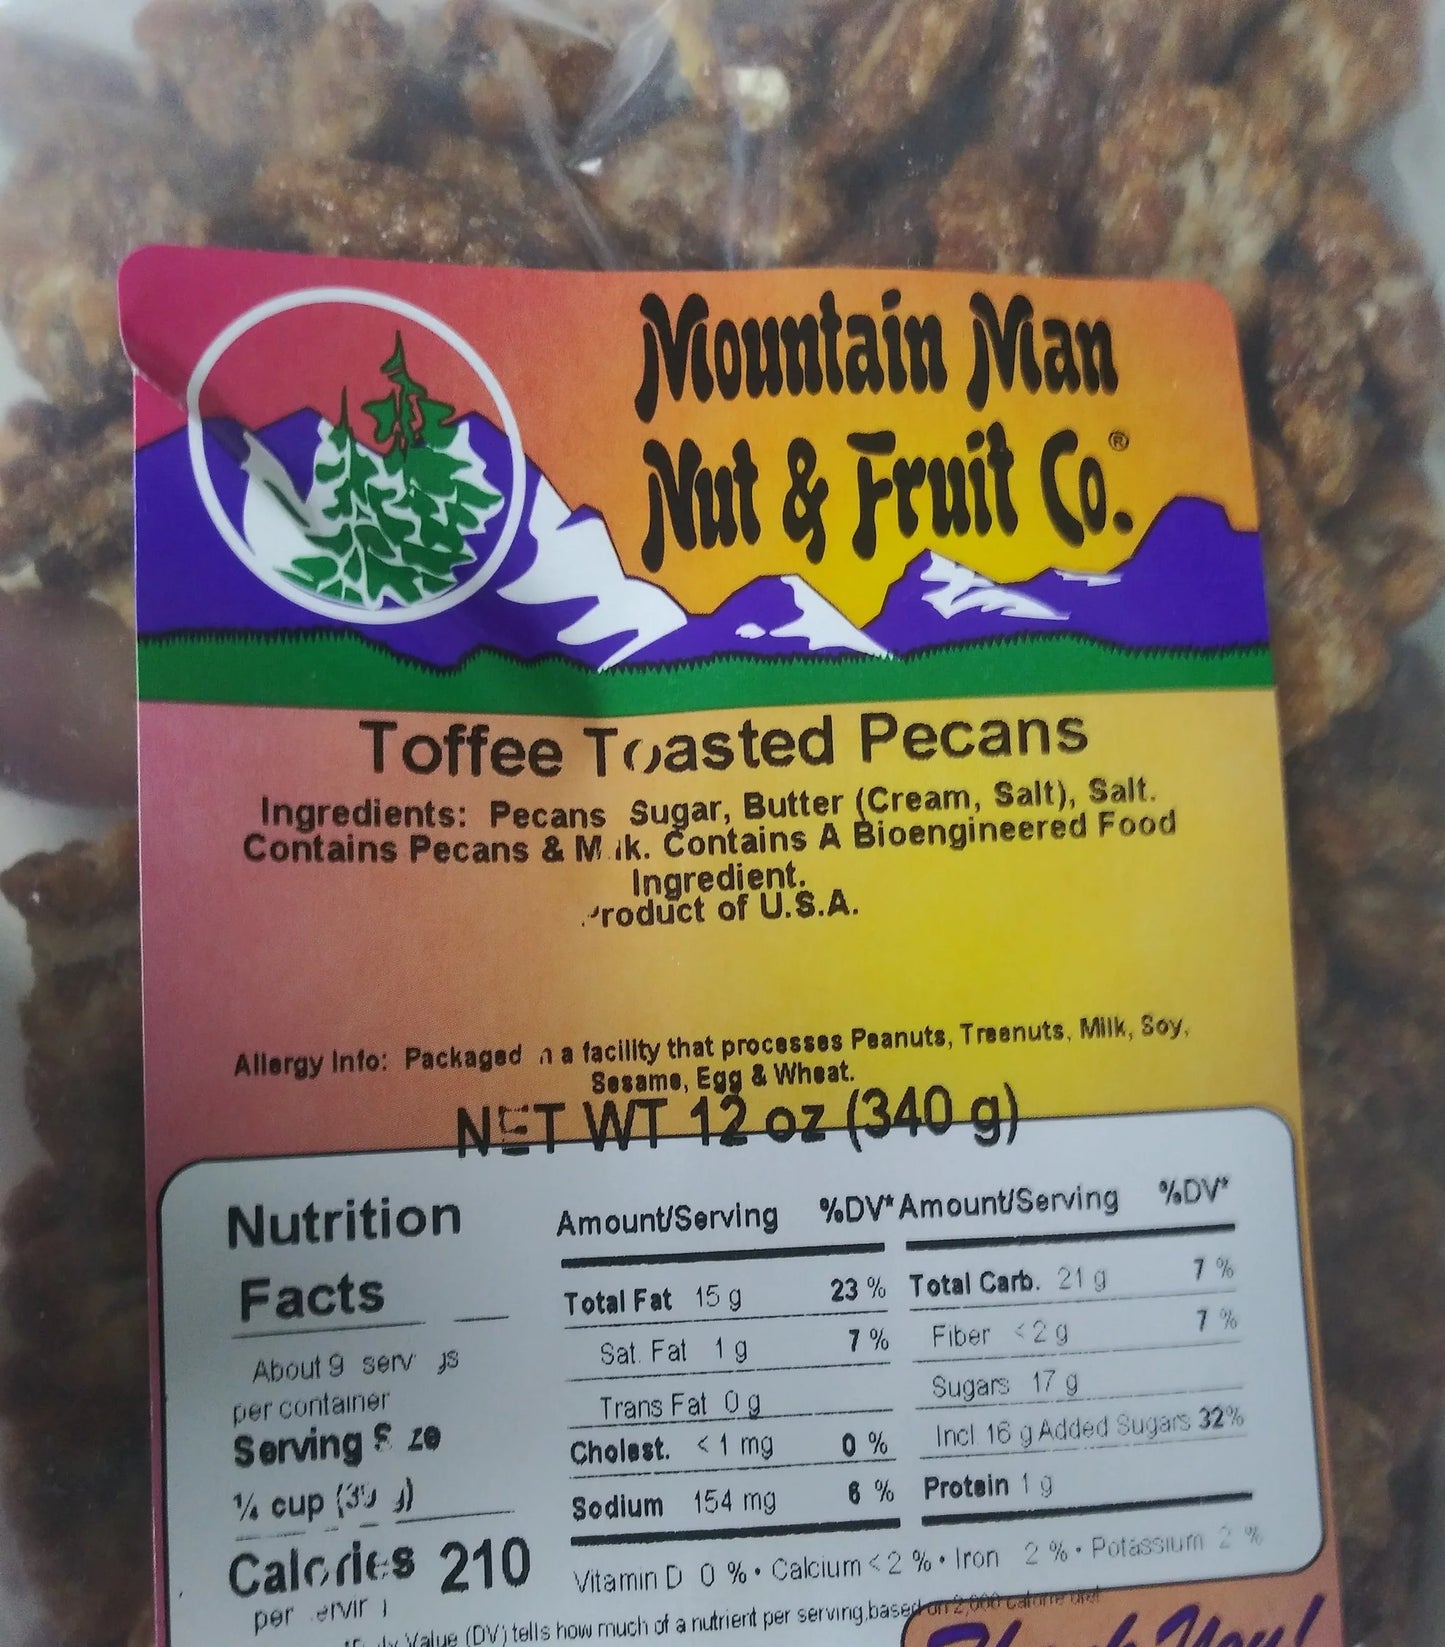 Toffee Toasted Pecans